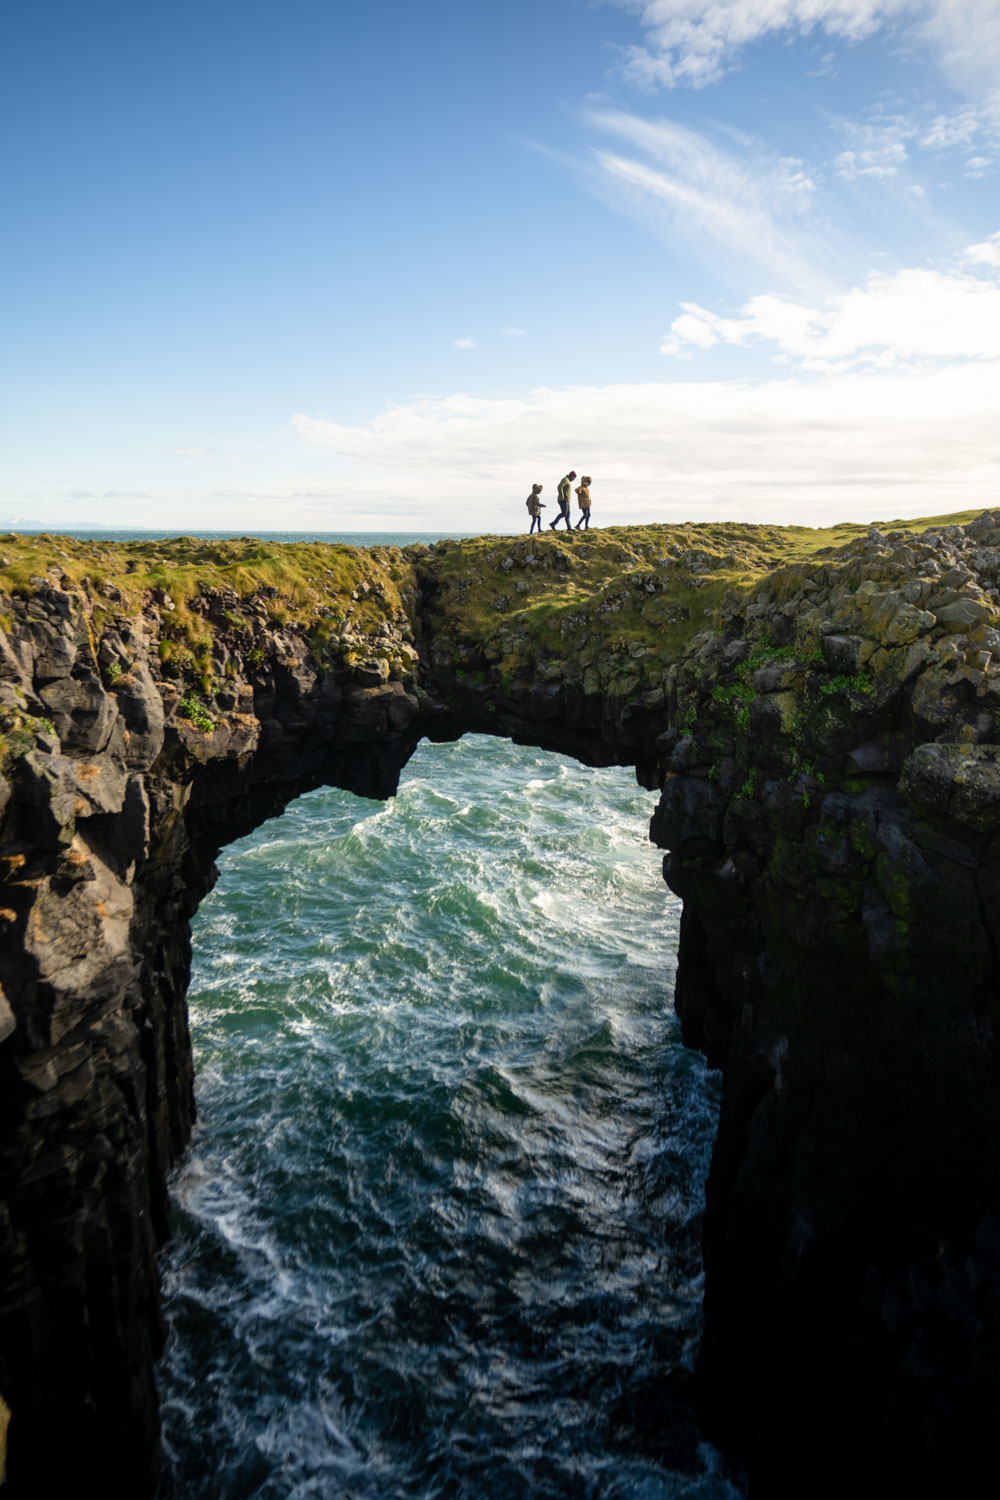 Chris Burkard and his 2 sons walk across a rocky archway at Arnastapi on the Snæfellsnes peninsula. The sea is underneath the arch